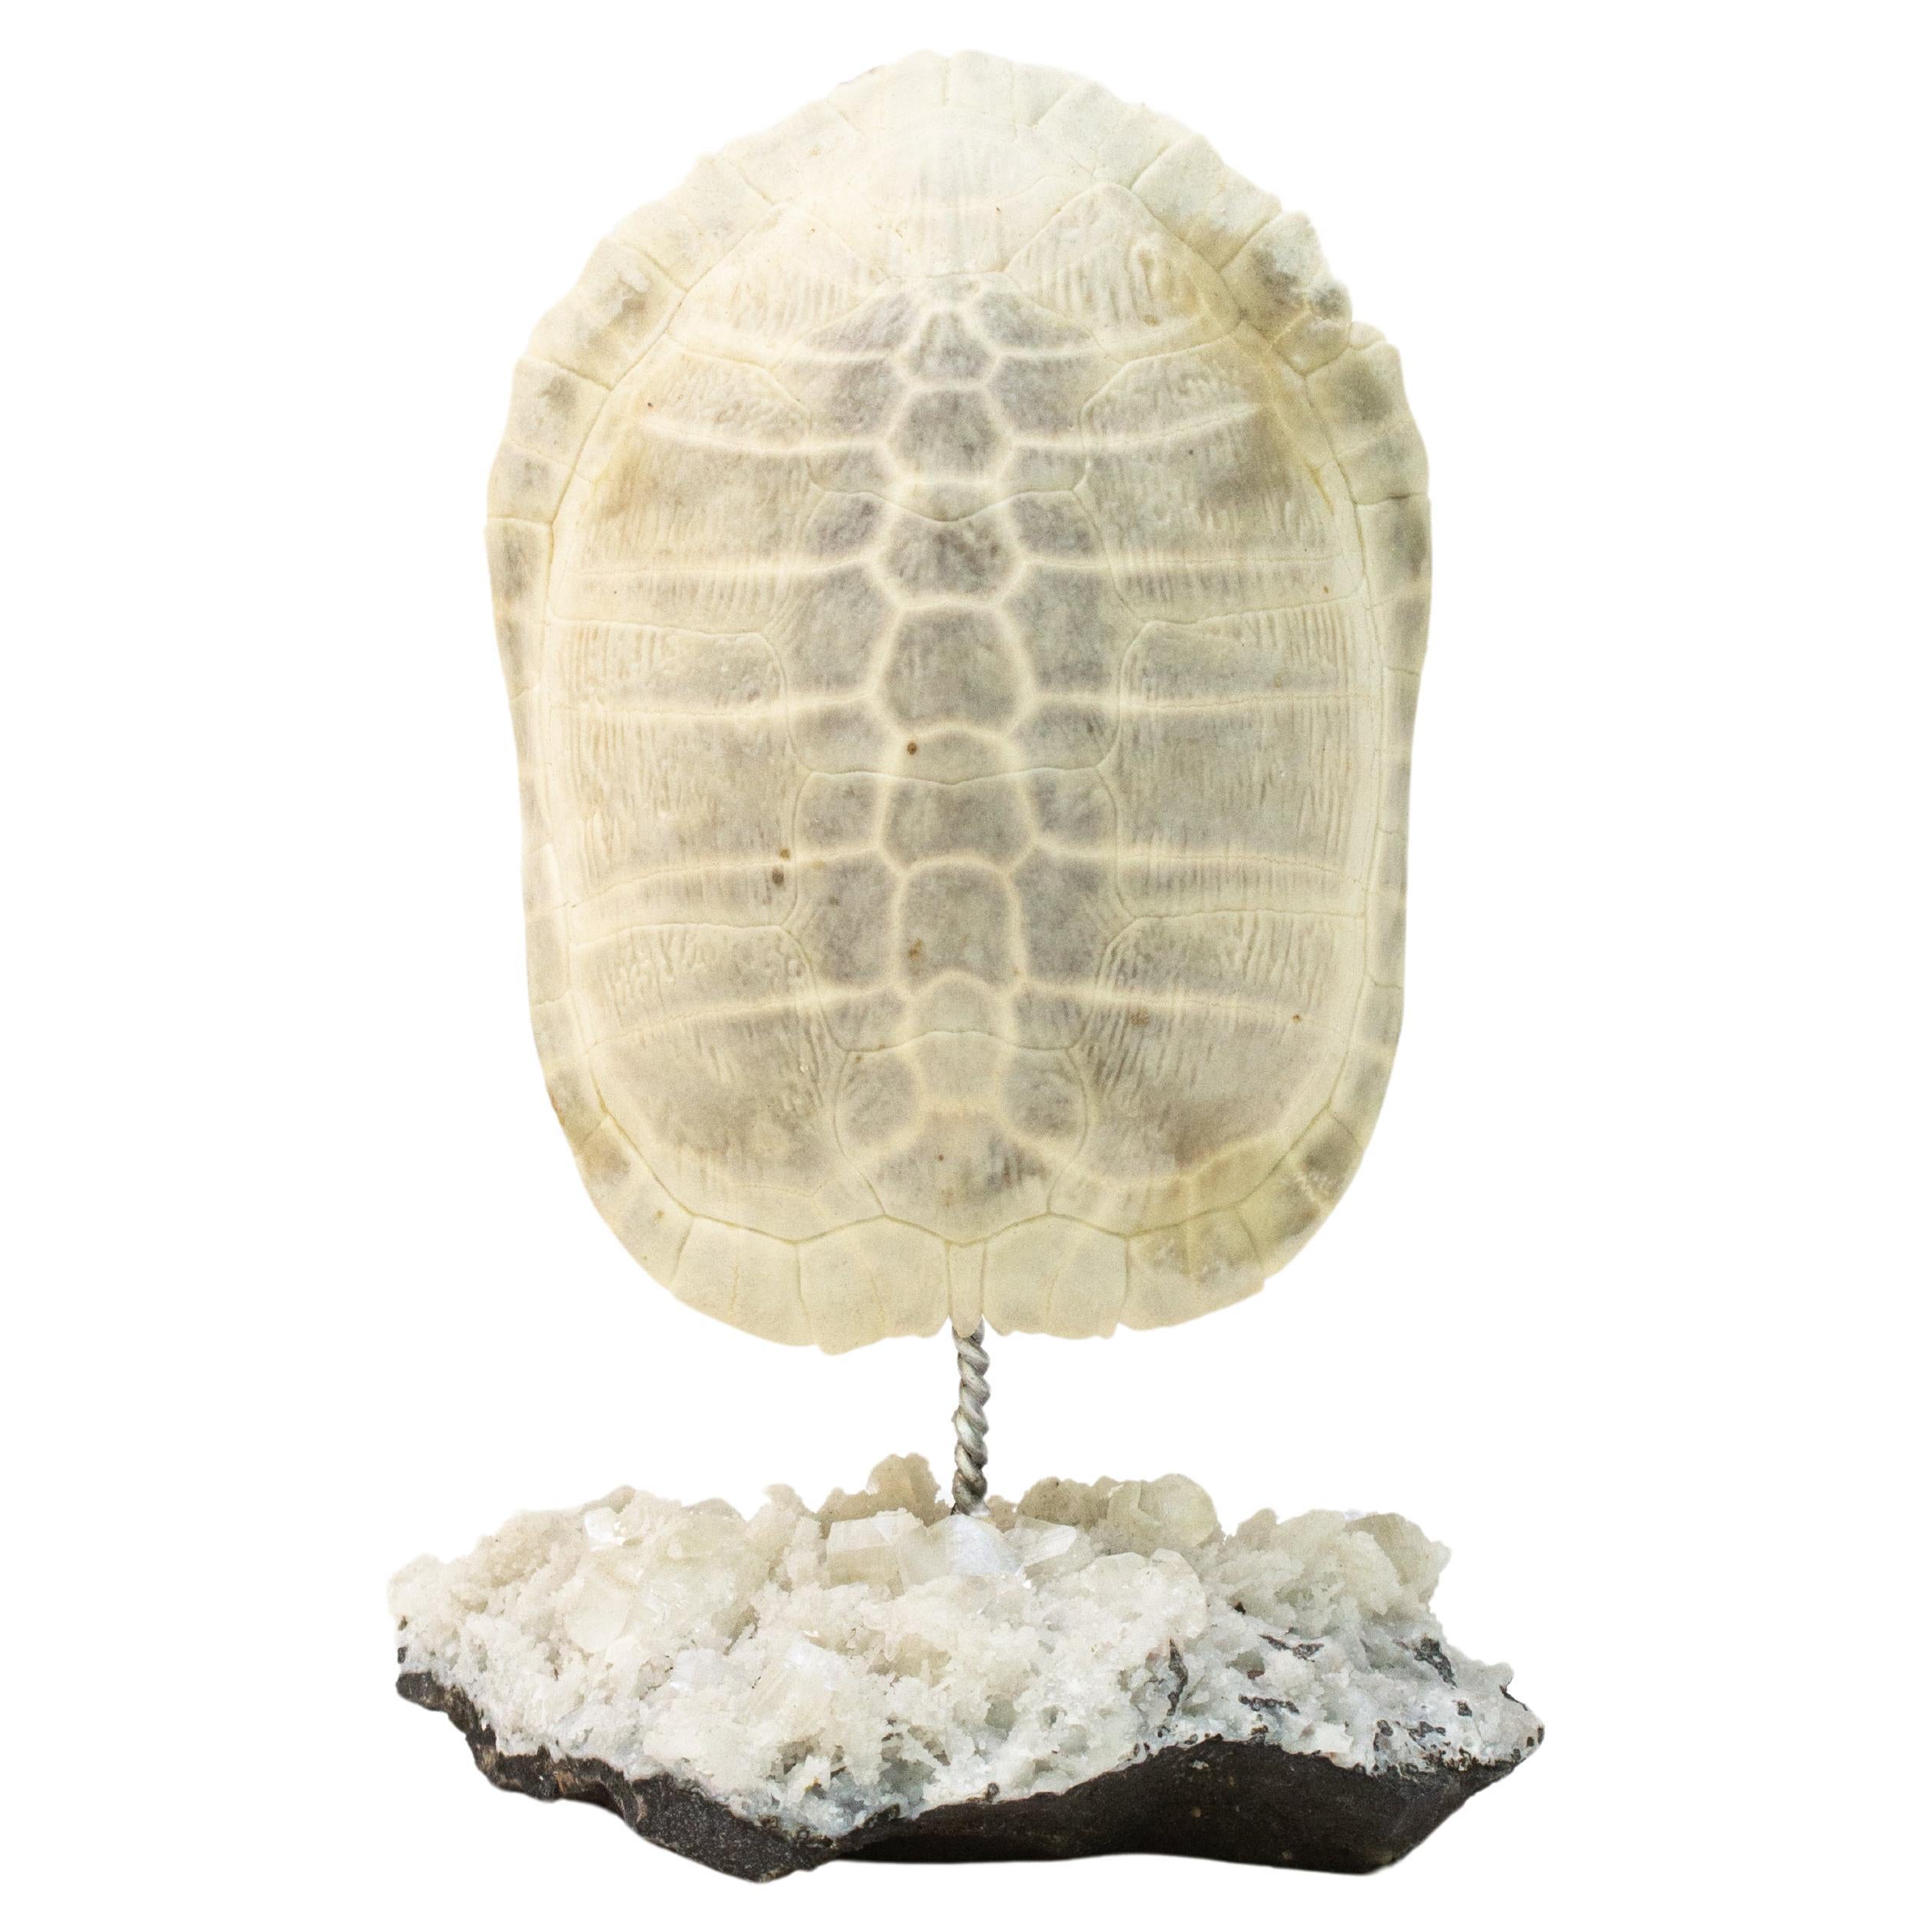 Bleached Turtle Shell Mounted on a Stilbite and Apophyllite Mineral Base